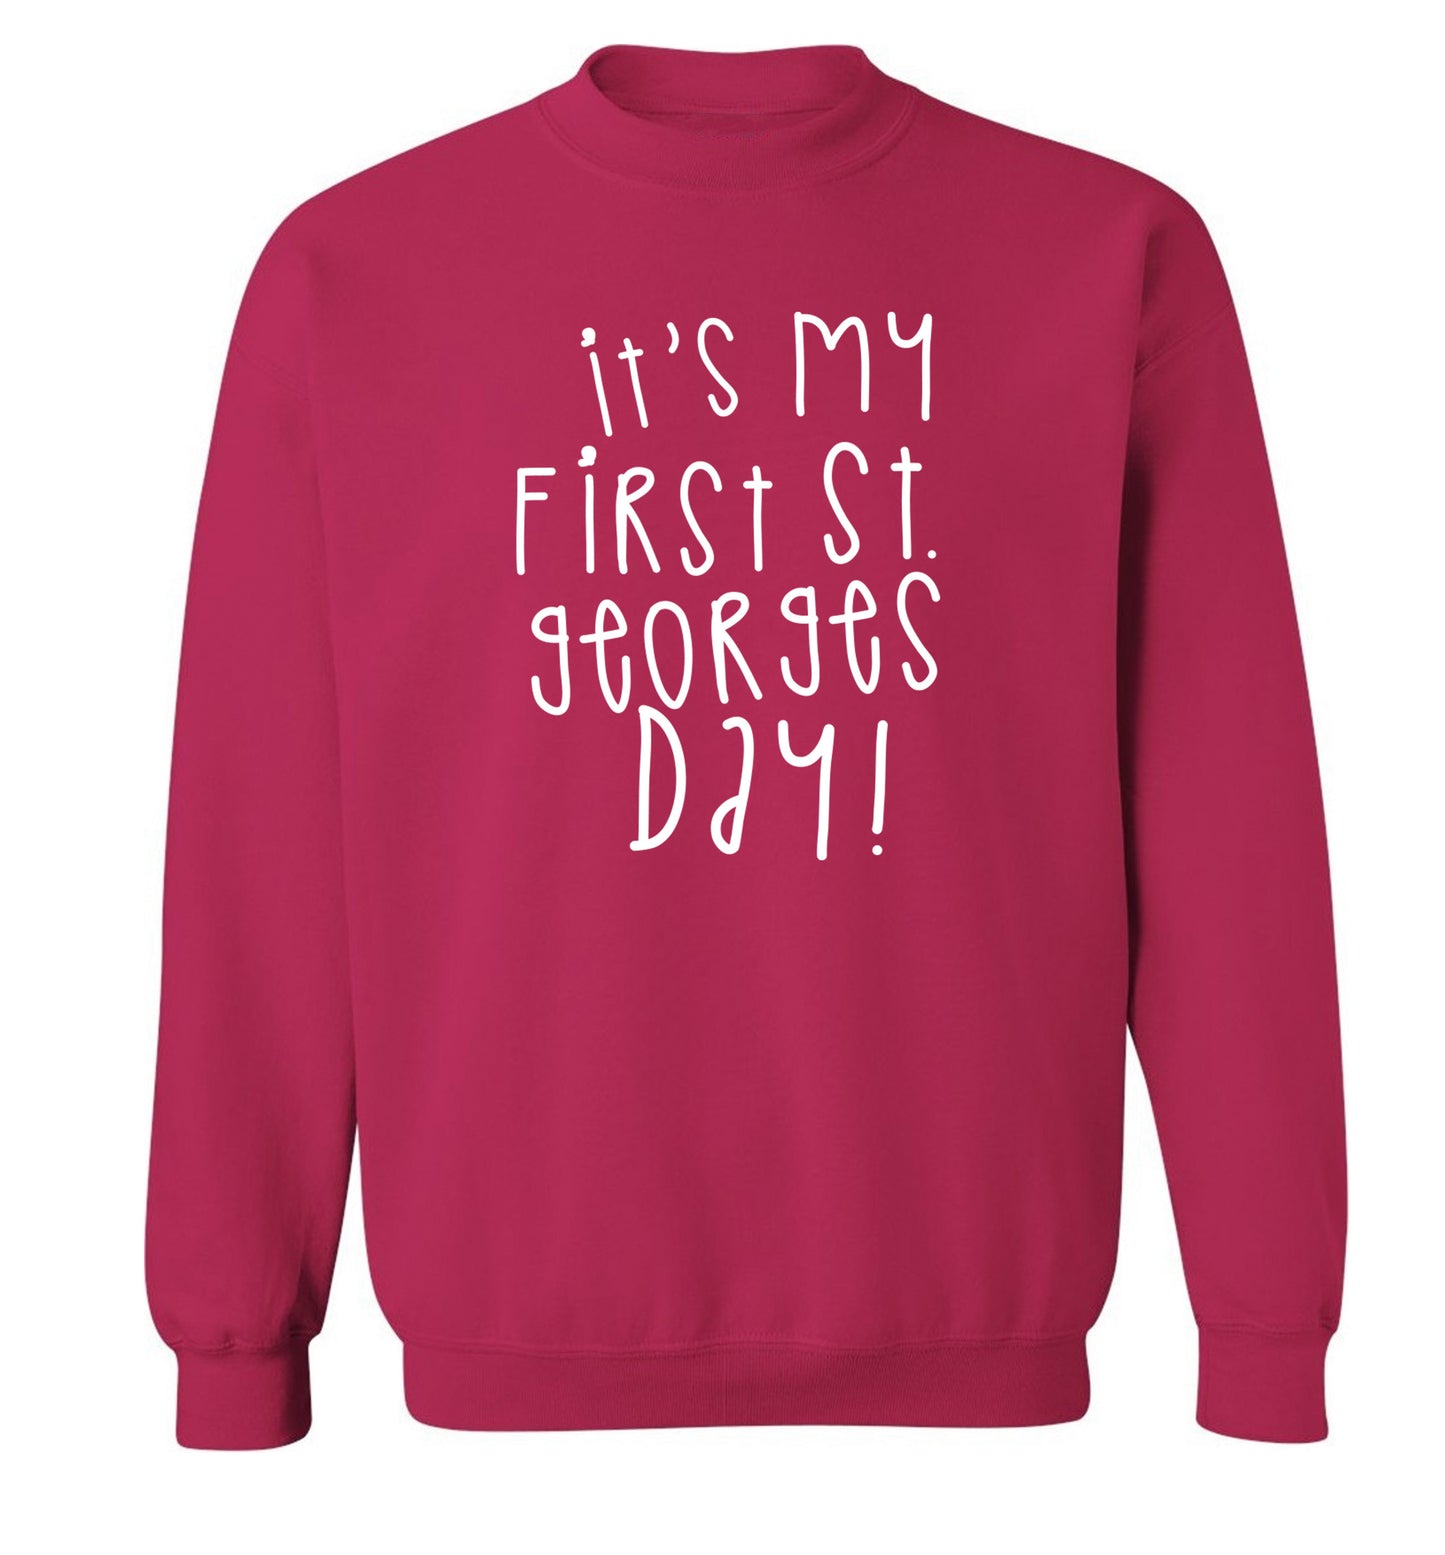 It's my first St Georges day Adult's unisex pink Sweater 2XL